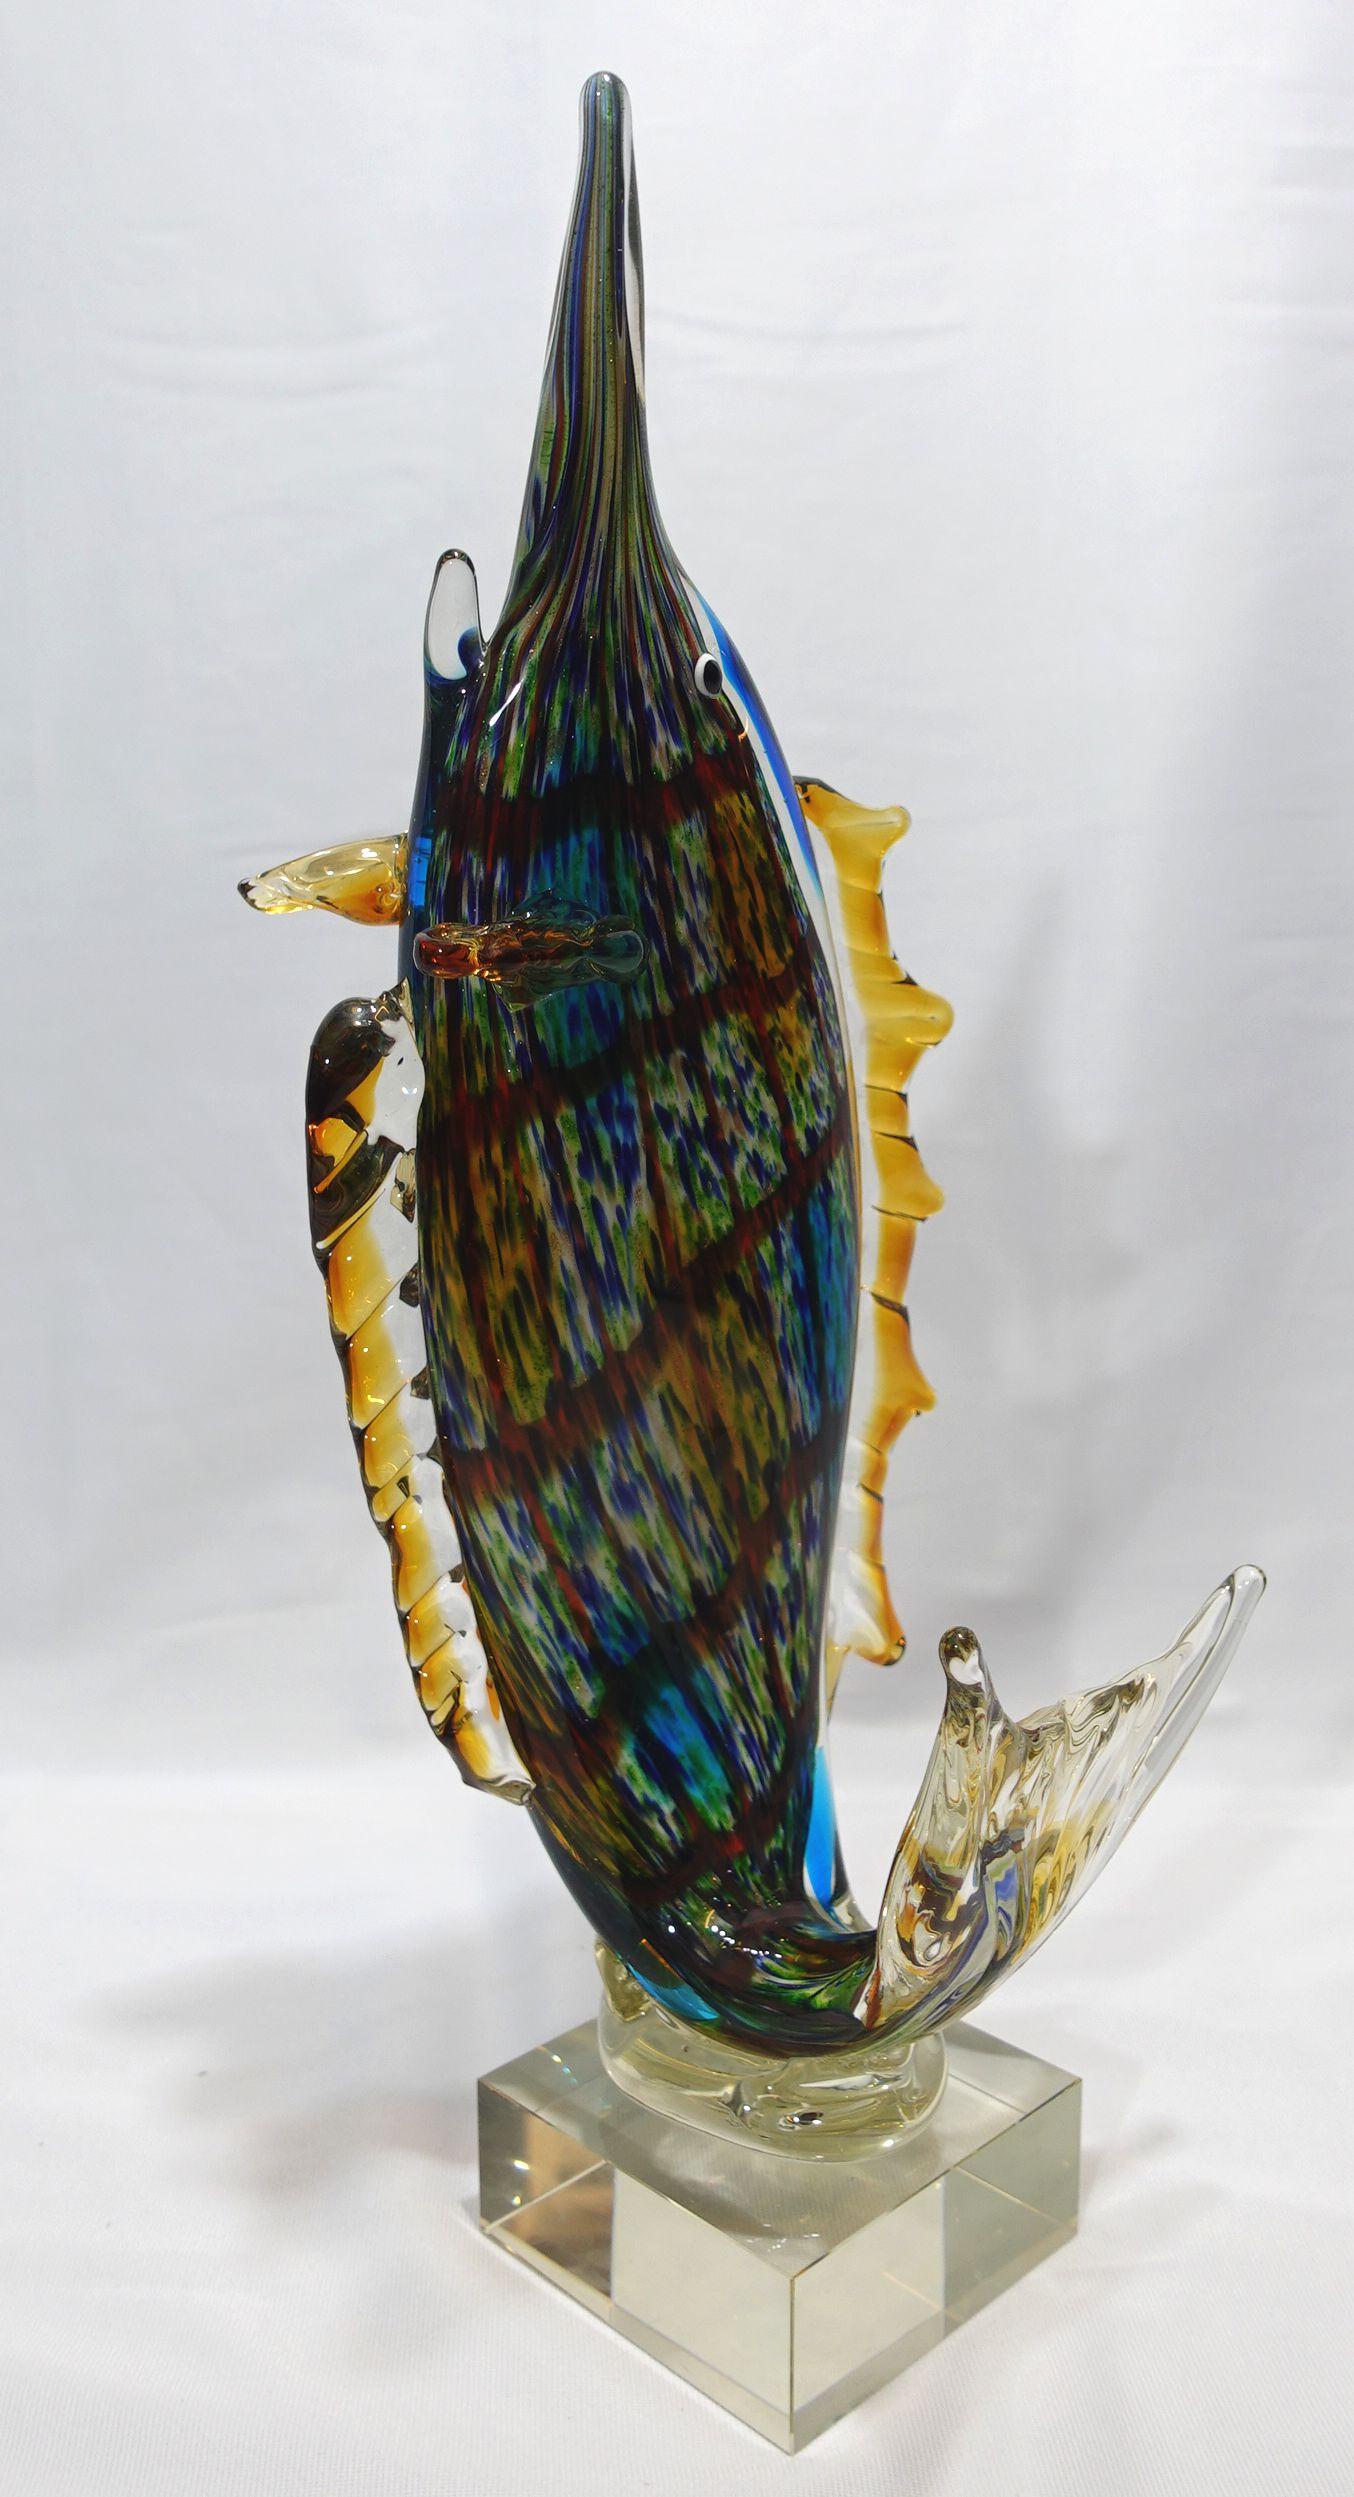 A Large and Heavy Murano Style Art Glass SailFish with many vivid colors applied on the body and set on a square clear glass, a very charming piece.